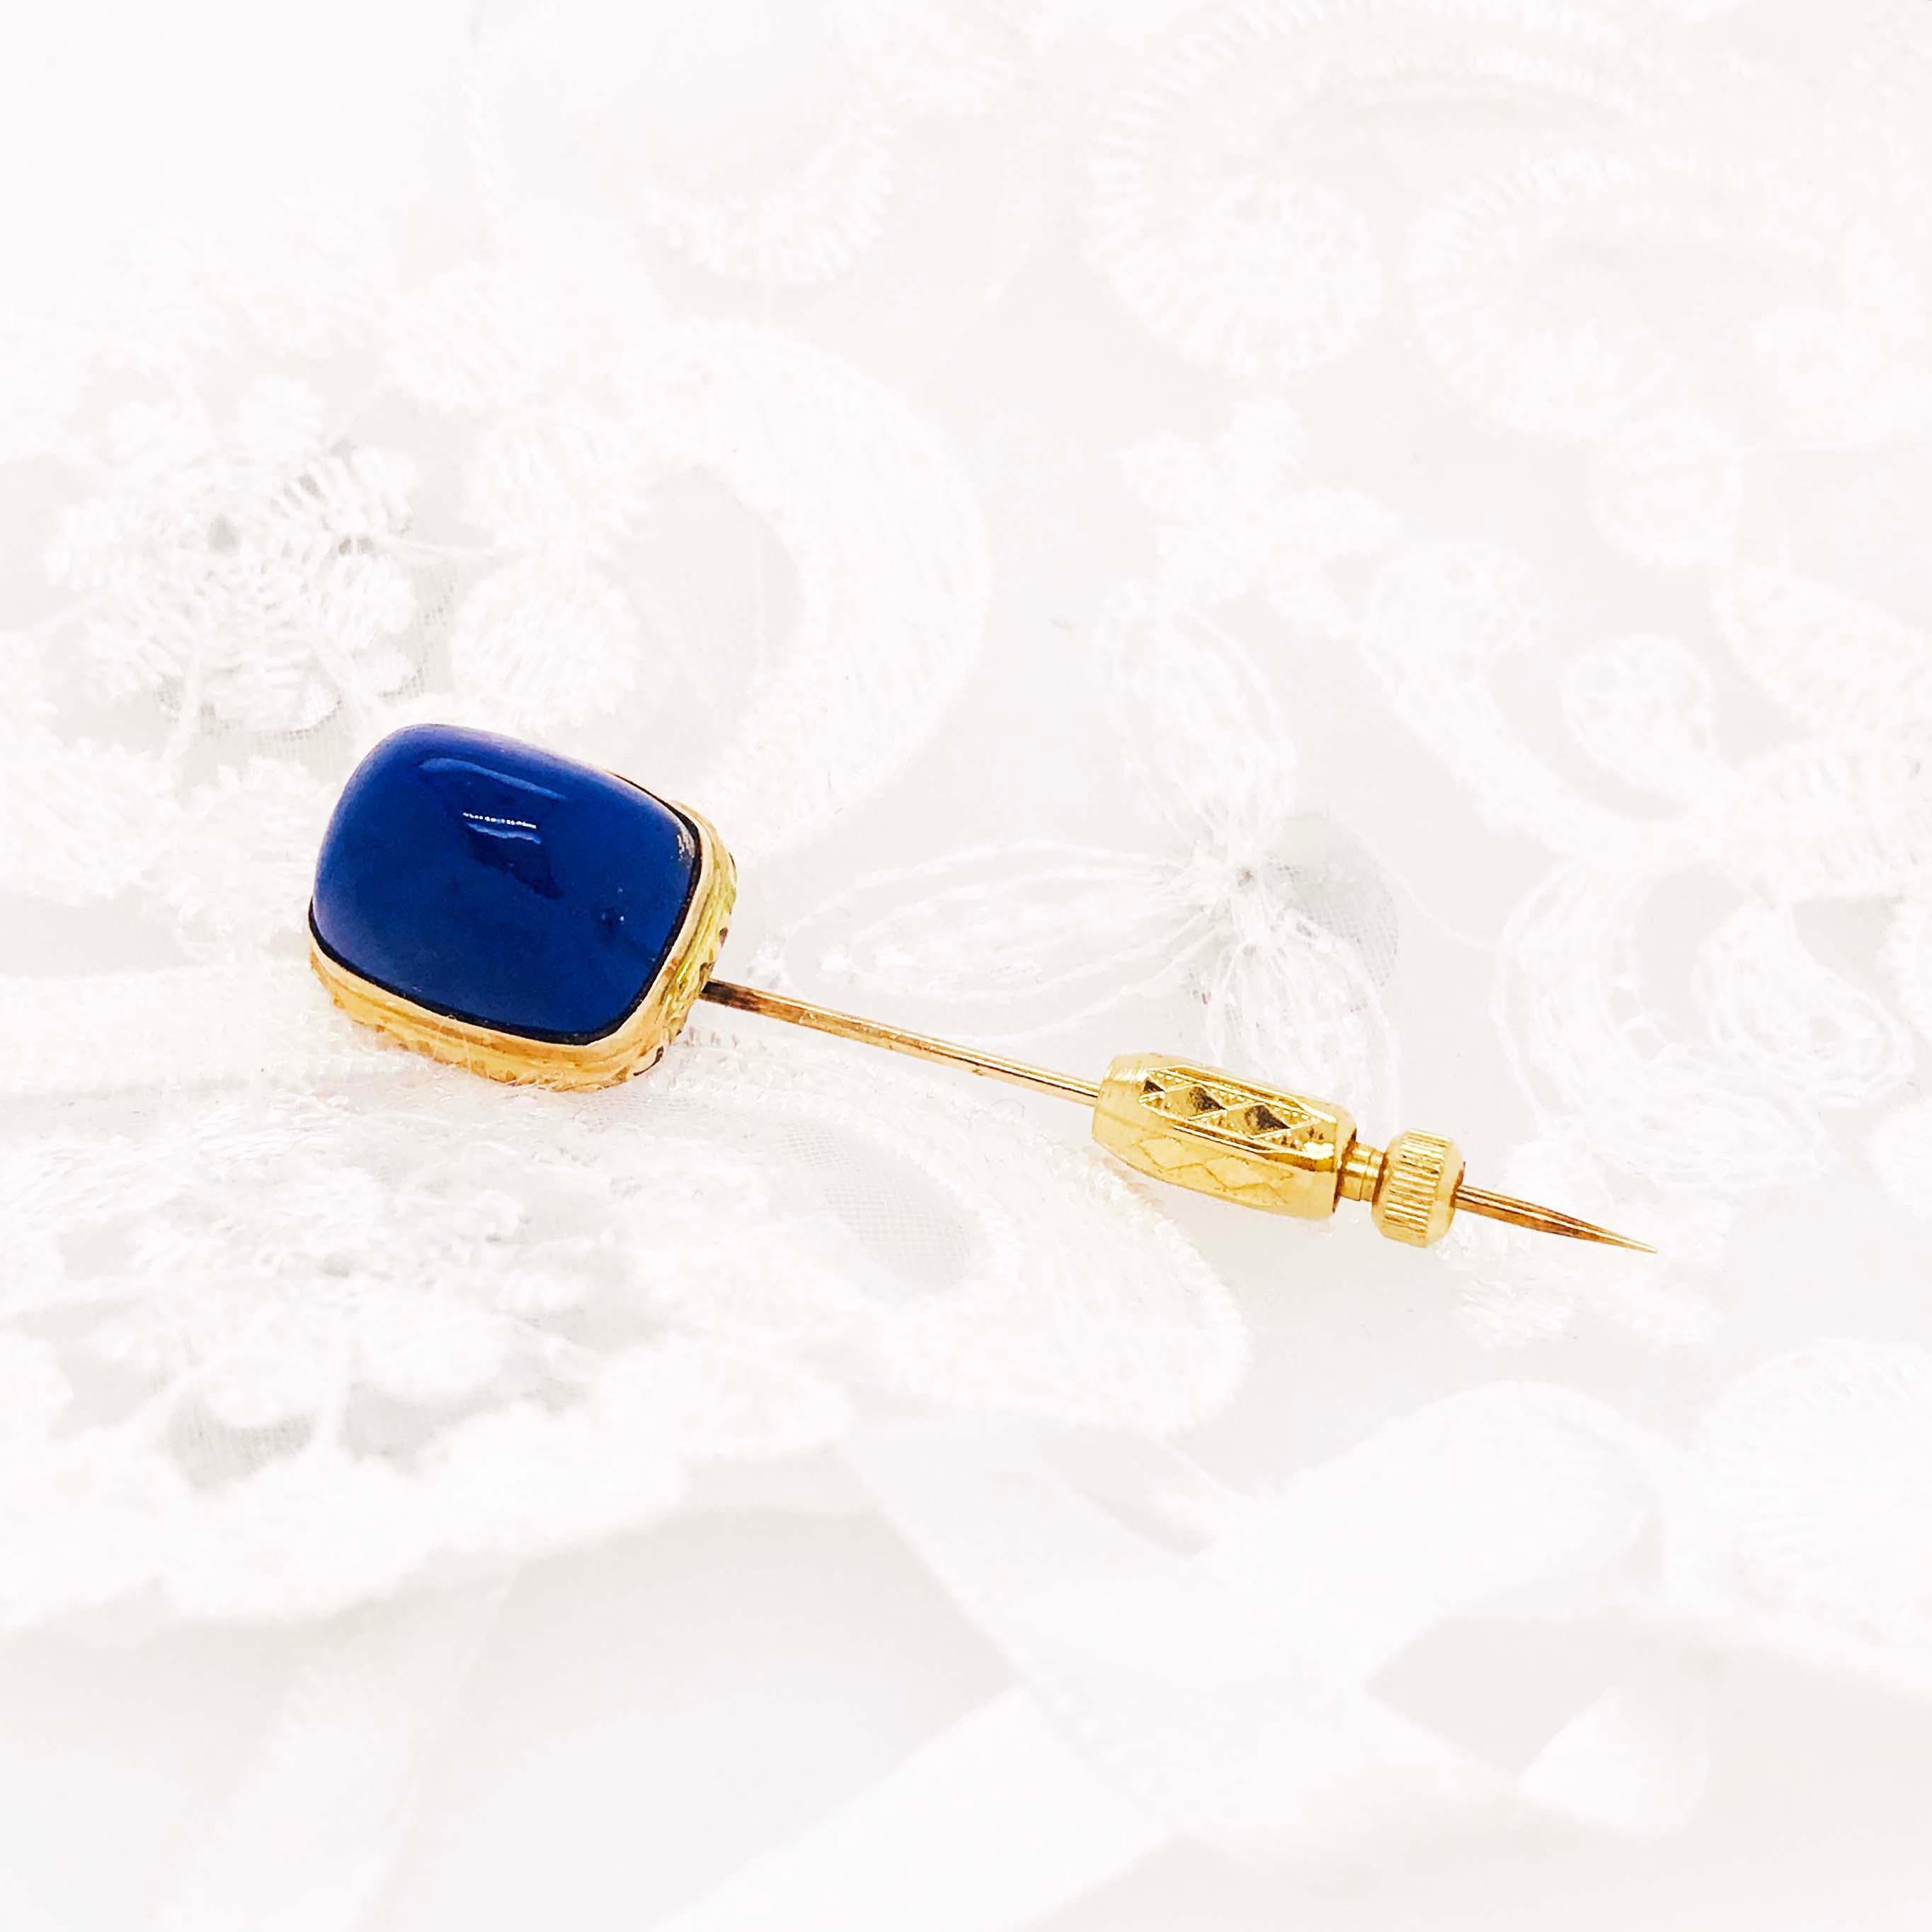 This gorgeous genuine blue lapis brooch is so bold and such a great accent to any piece! This modern, hand engraved design has been made in 18k yellow gold with a genuine blue lapis piece set on the top. 
The blue lapis gemstone is a cushion shaped,